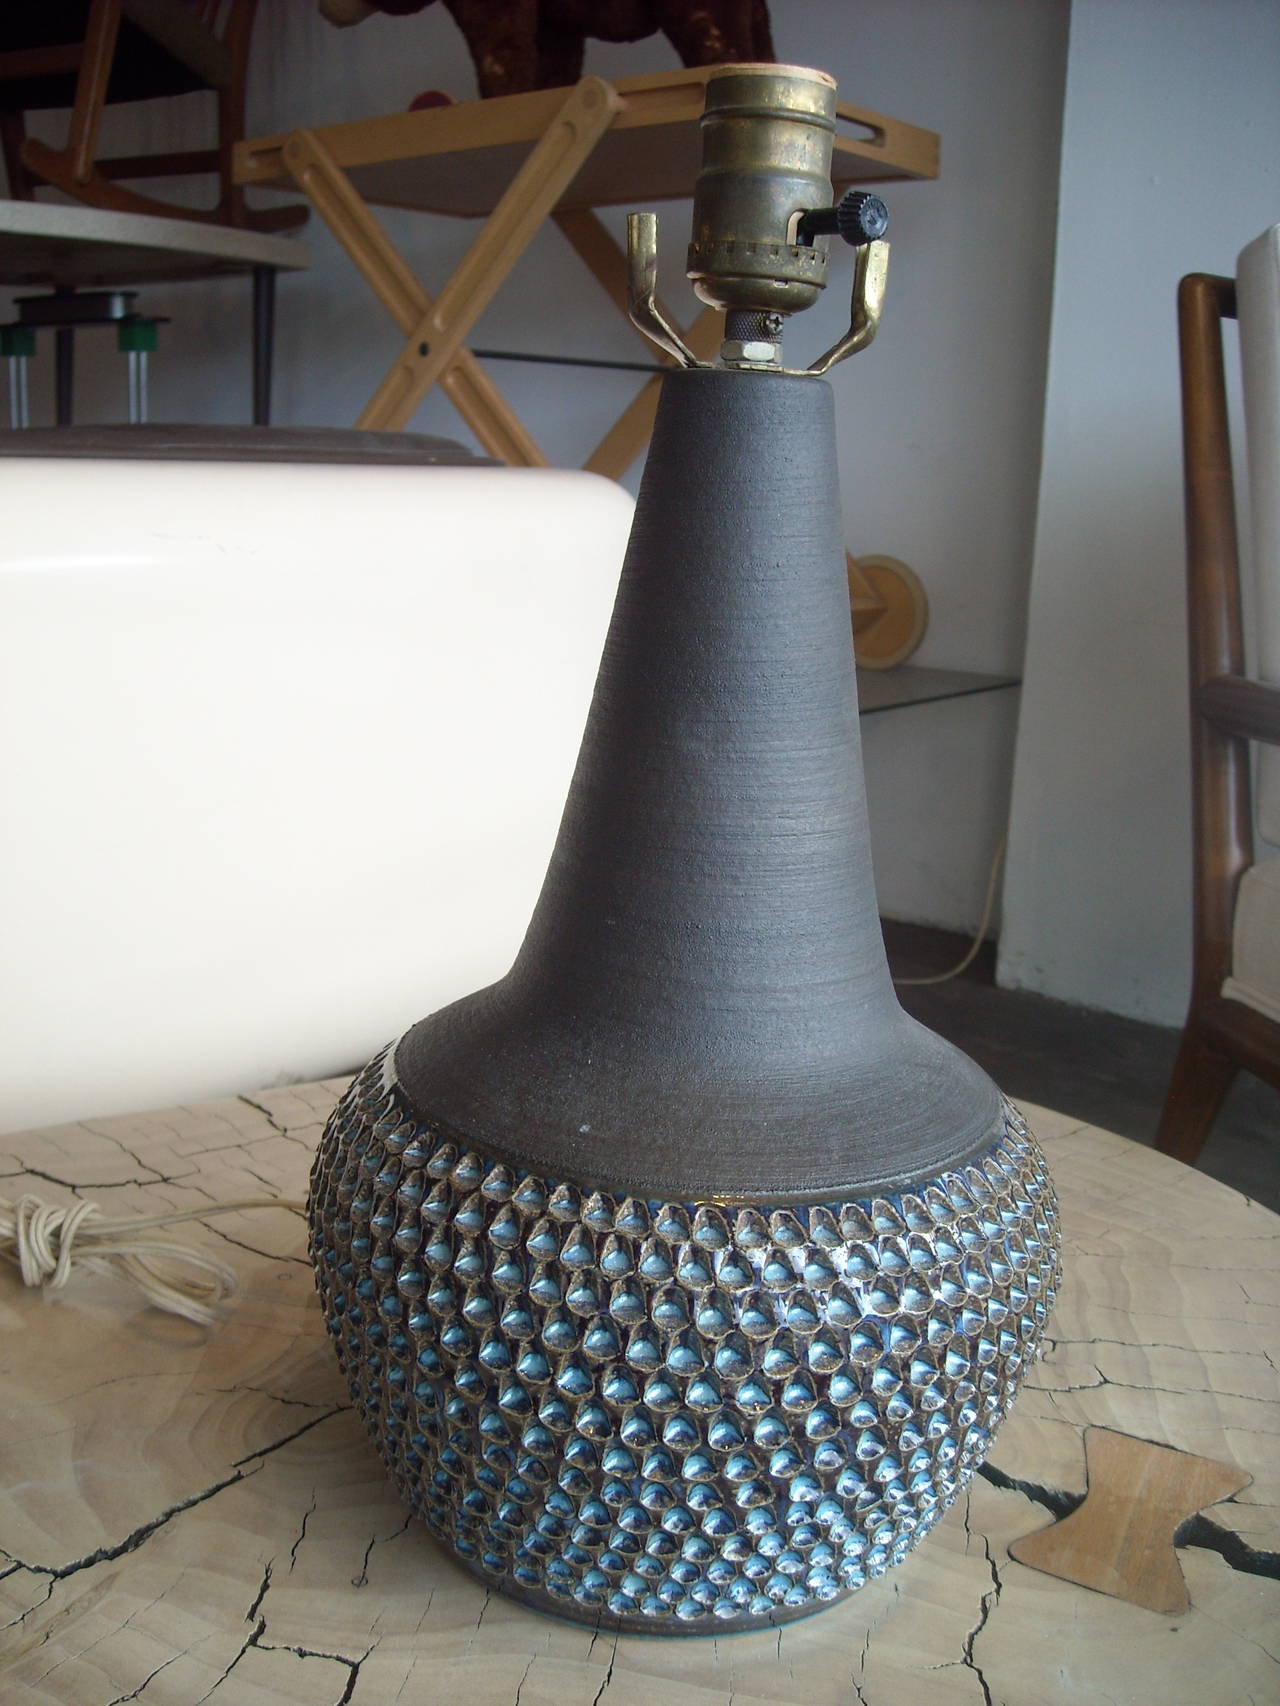 Very nice grey, charcoal, blue colors in this ceramic table lamp, made by Soholm. Vintage wire, working.